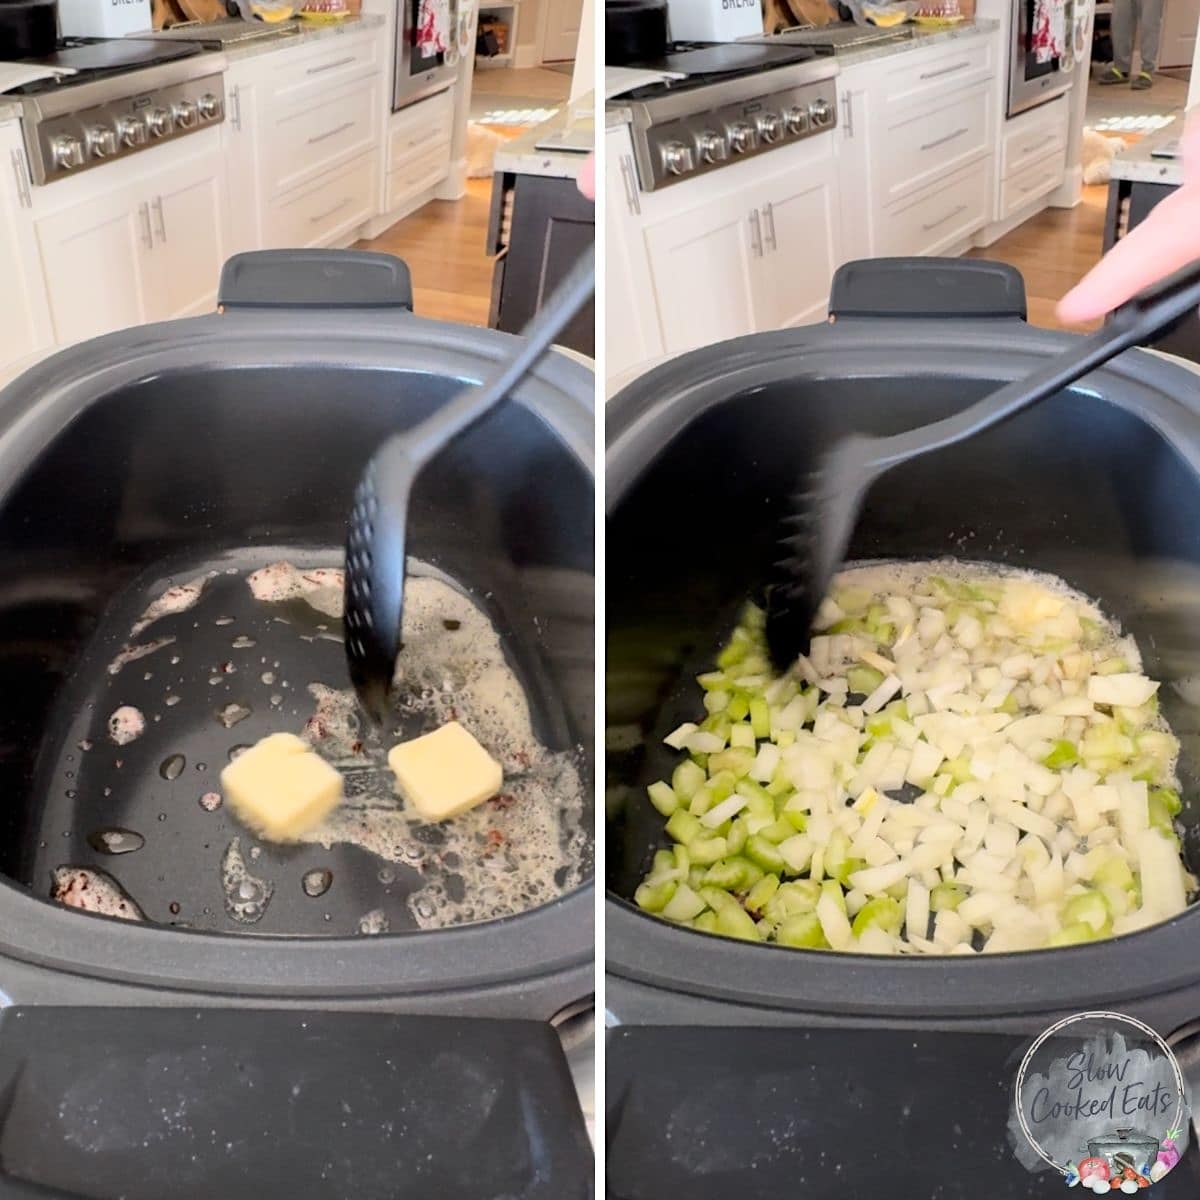 Sauteeing onion and celery in butter to make the clam chowder slow cooker recipe.